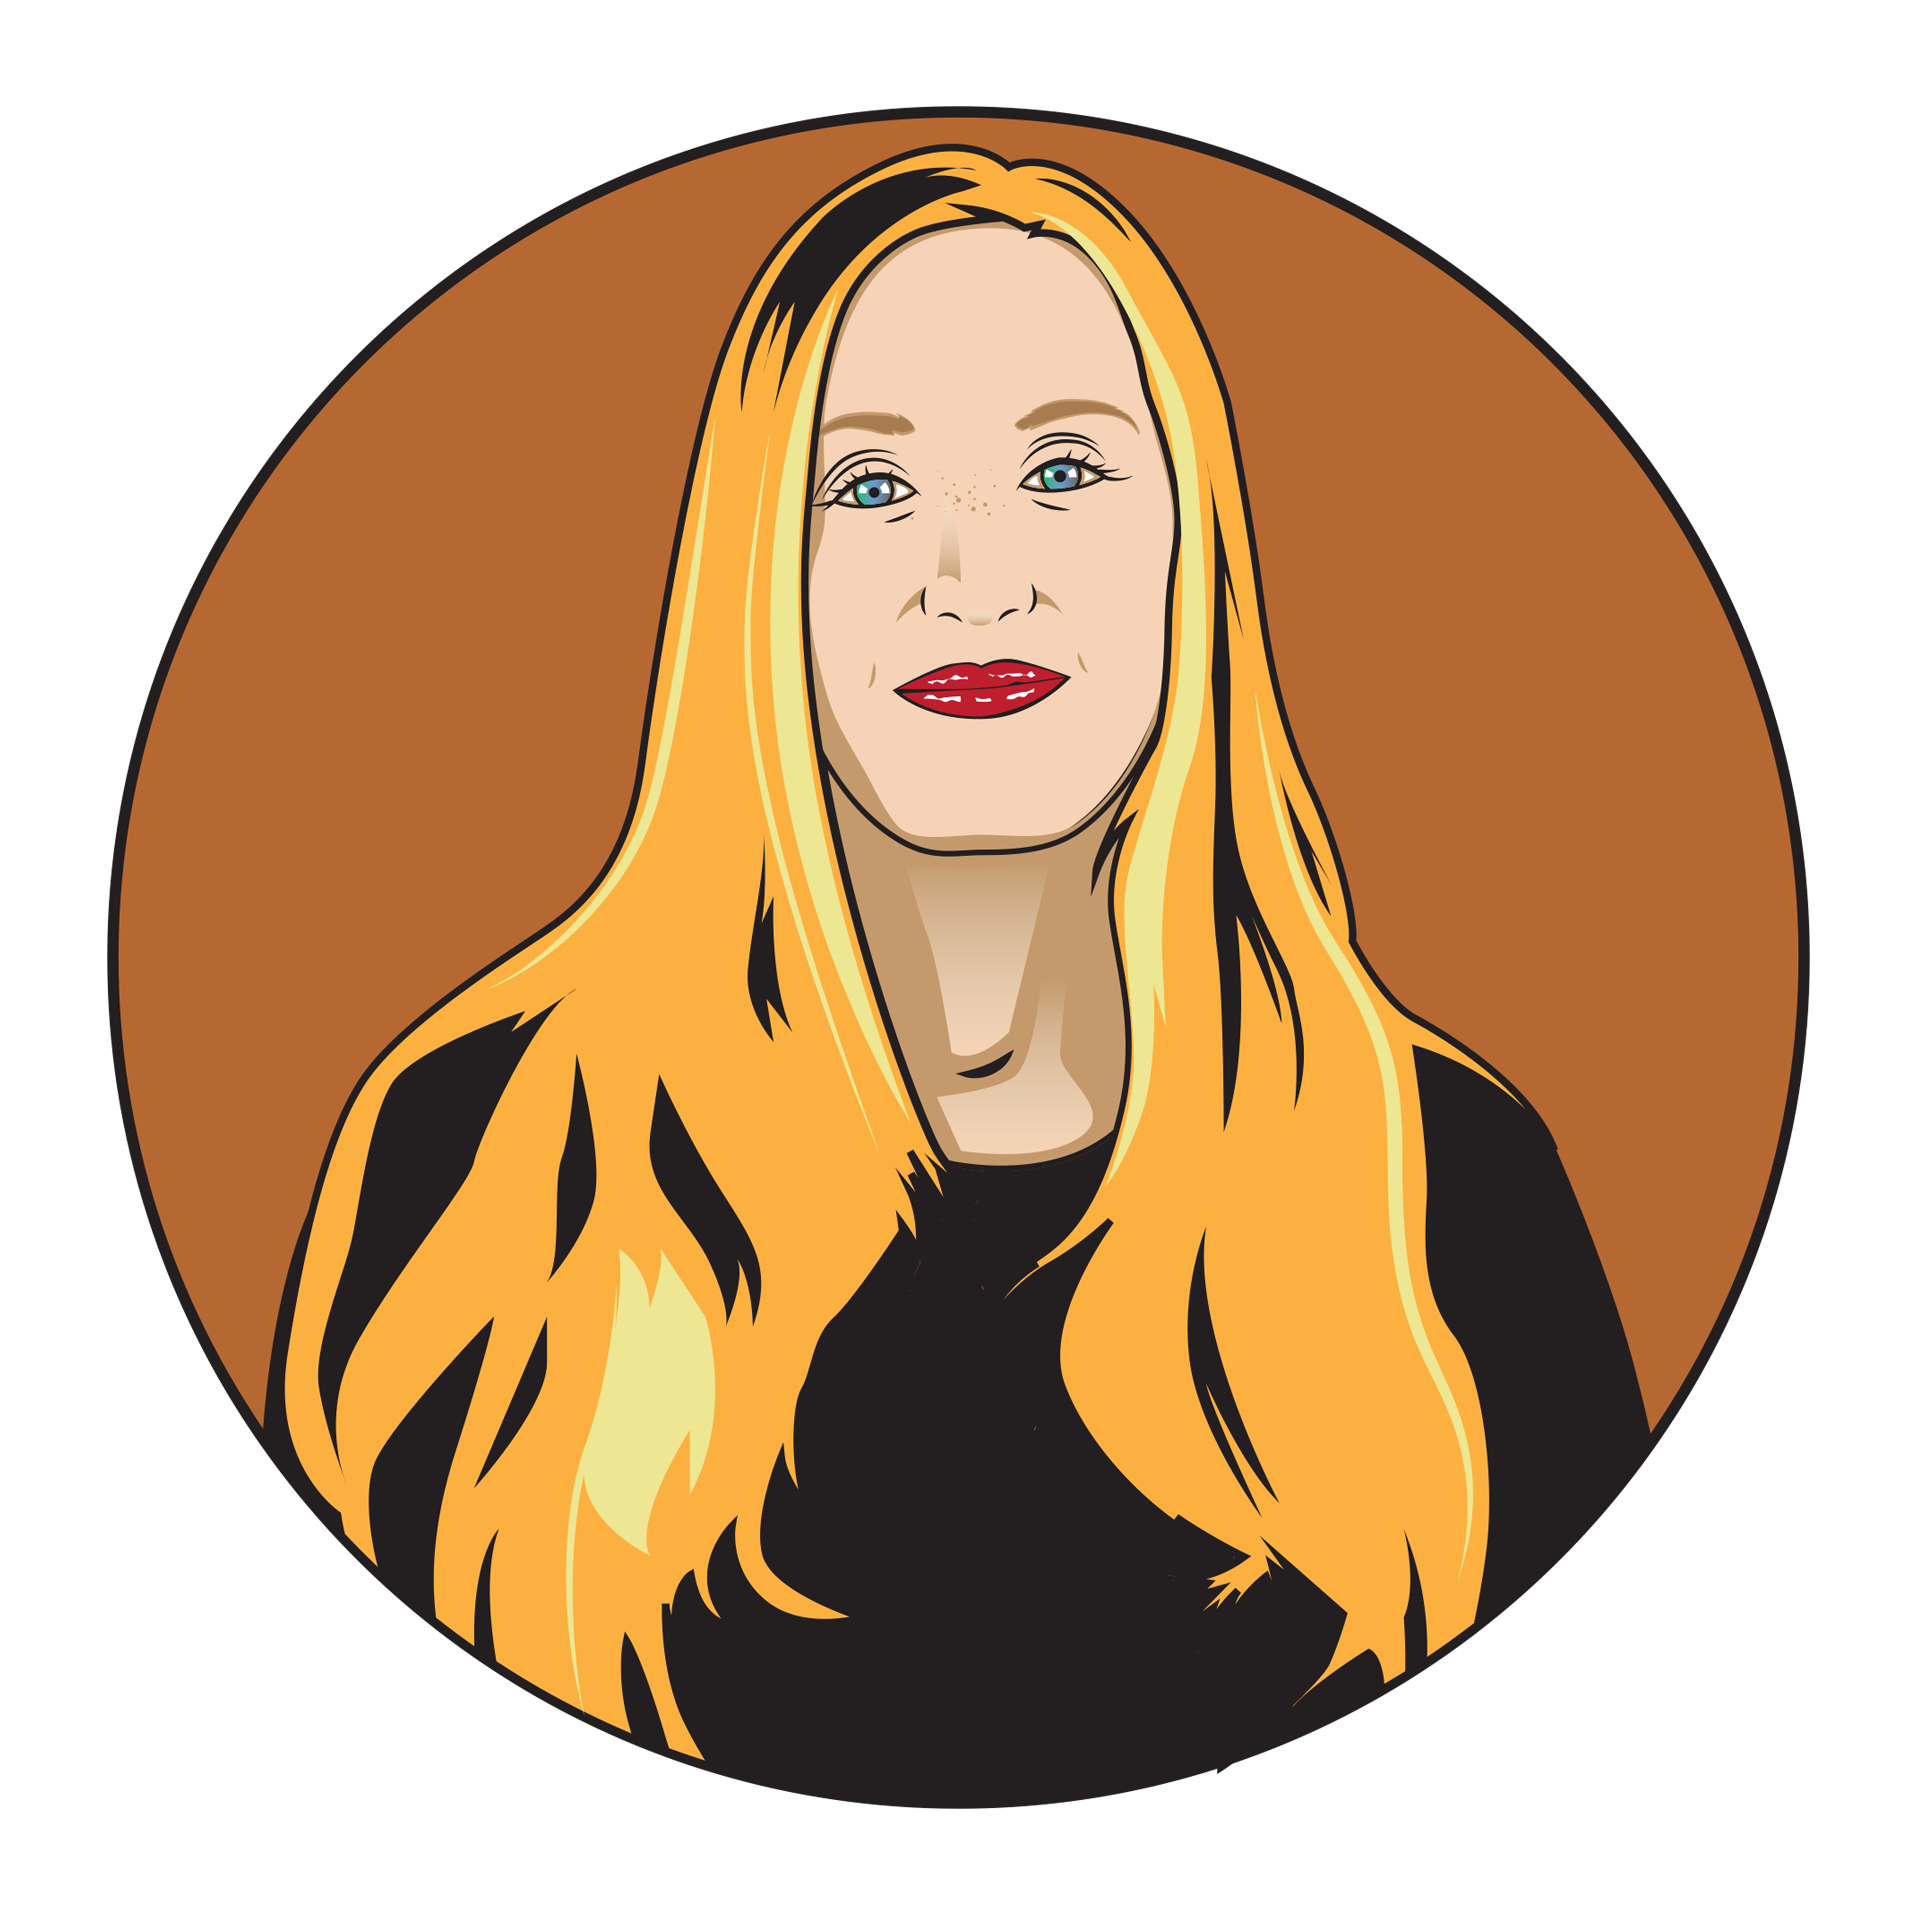 An illustrated image of Sasha, a white woman with golden blonde hair and blue eyes. She is wearing a black long sleeve shirt. Her image is on an orange background.